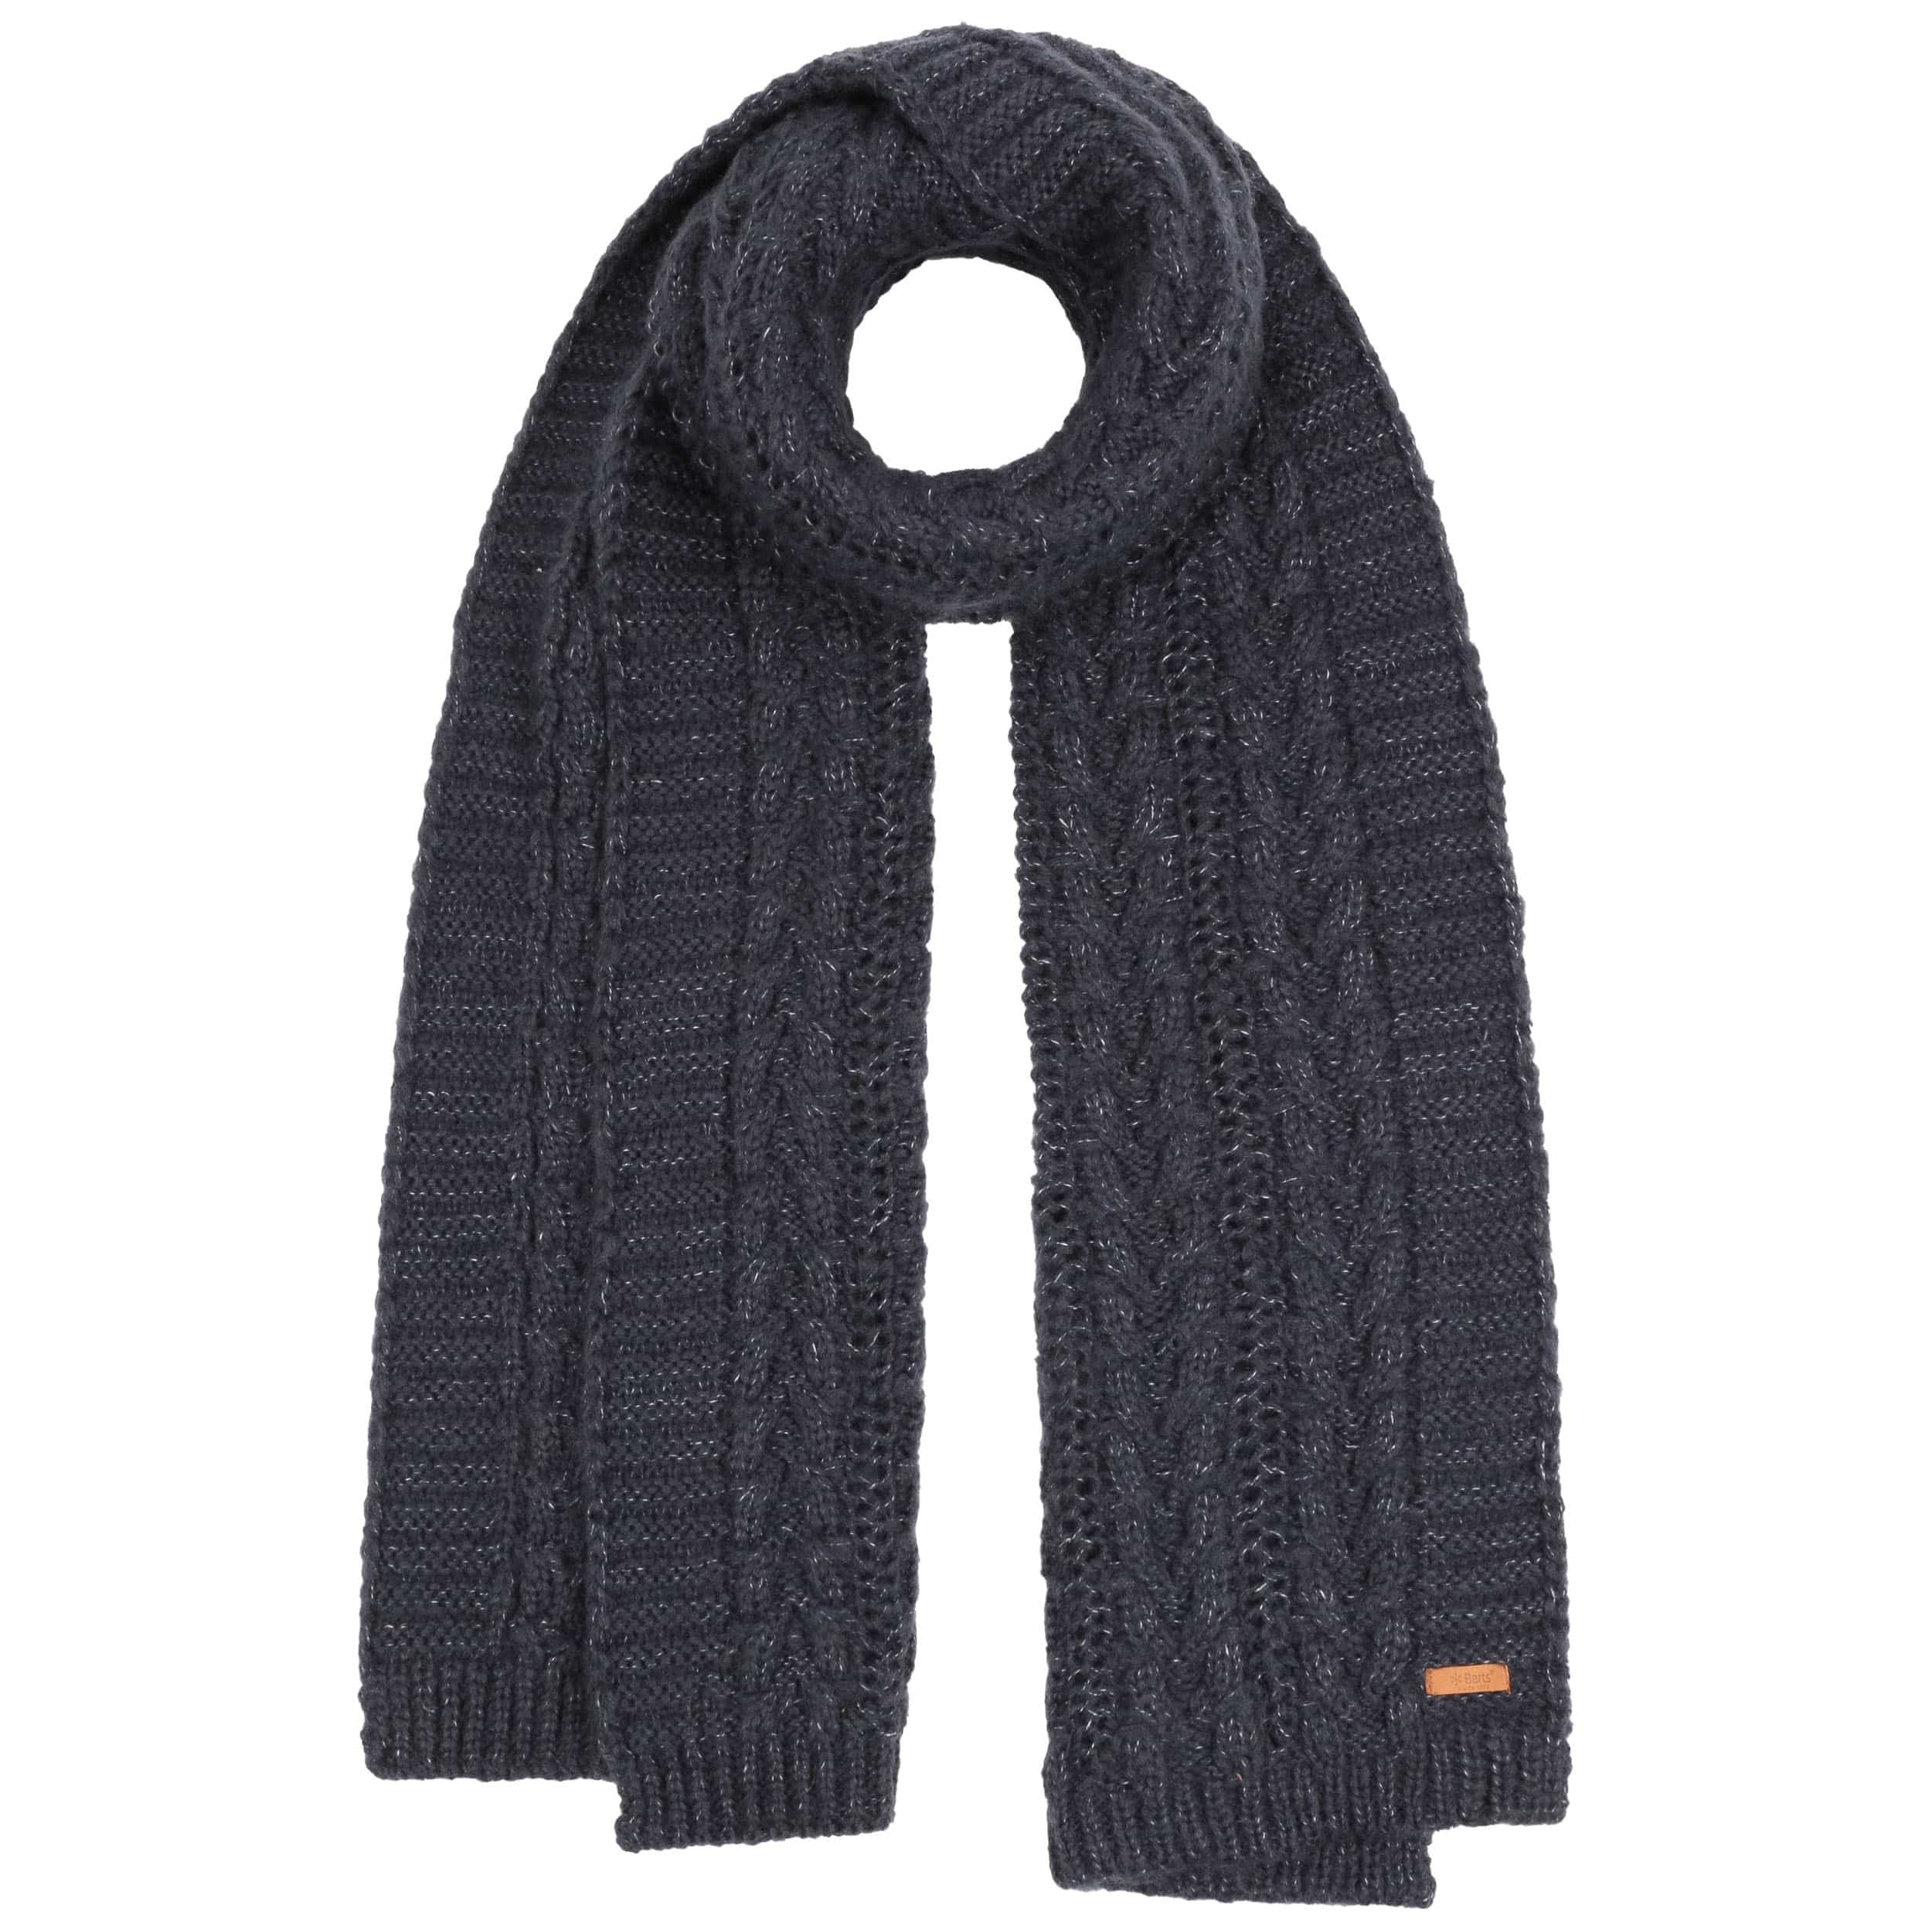 long black knitted scarf